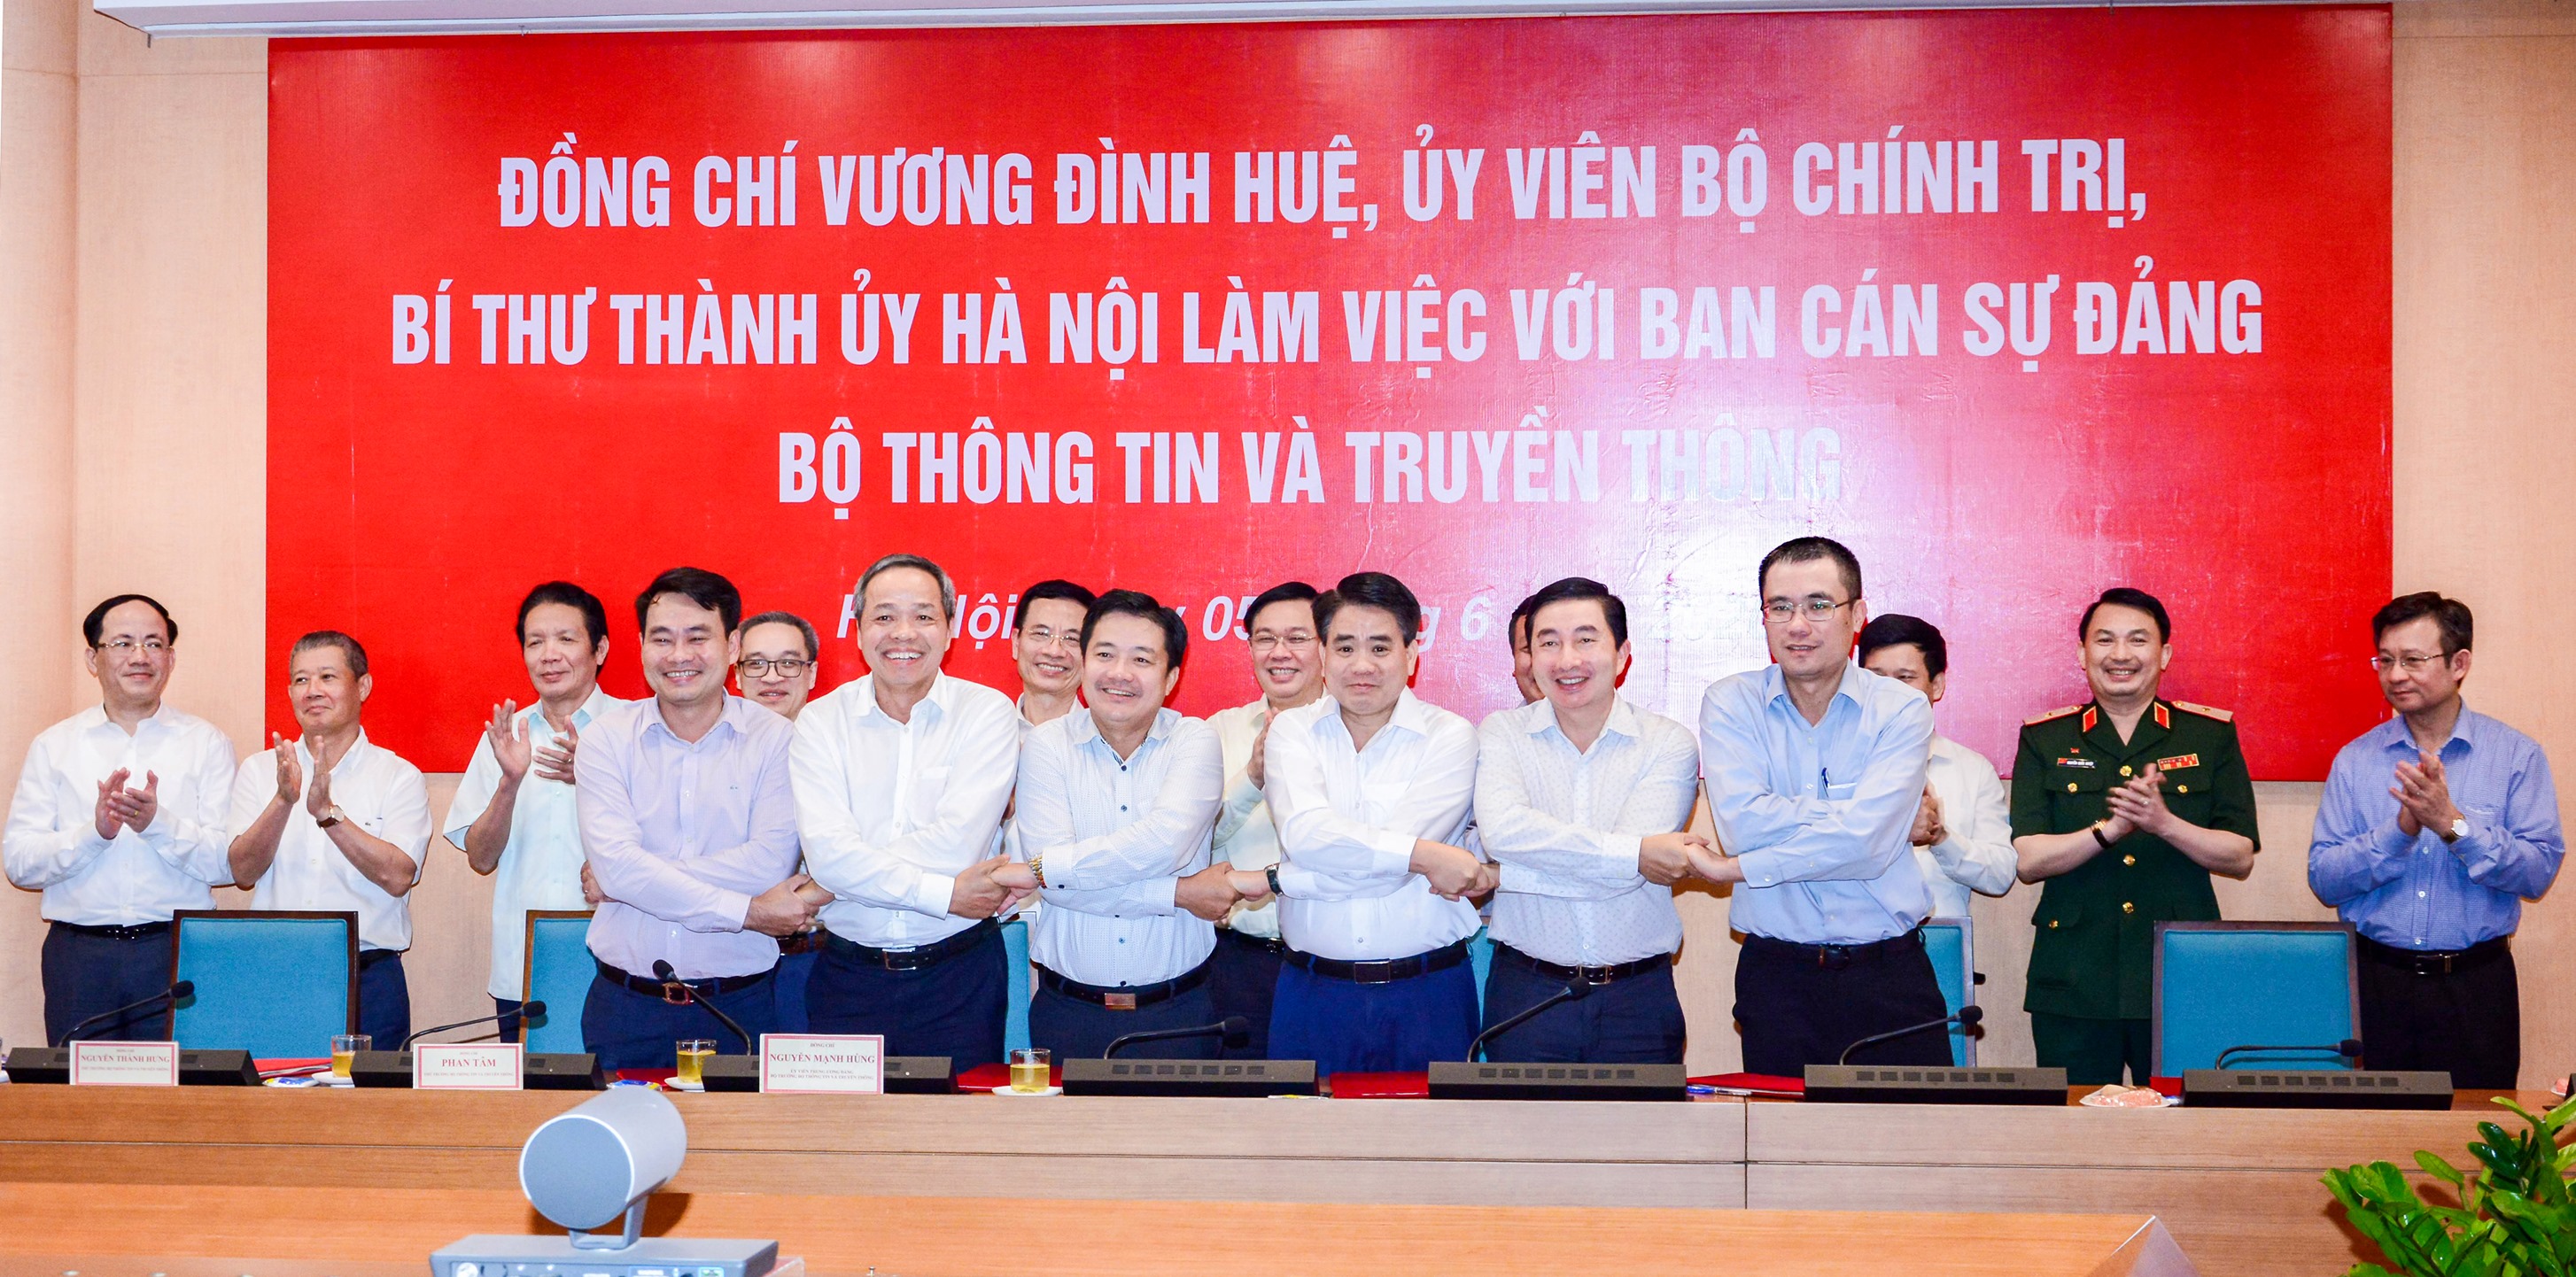 Chairman of CMC proposes to build and develop e-government with Hanoi People's Committee